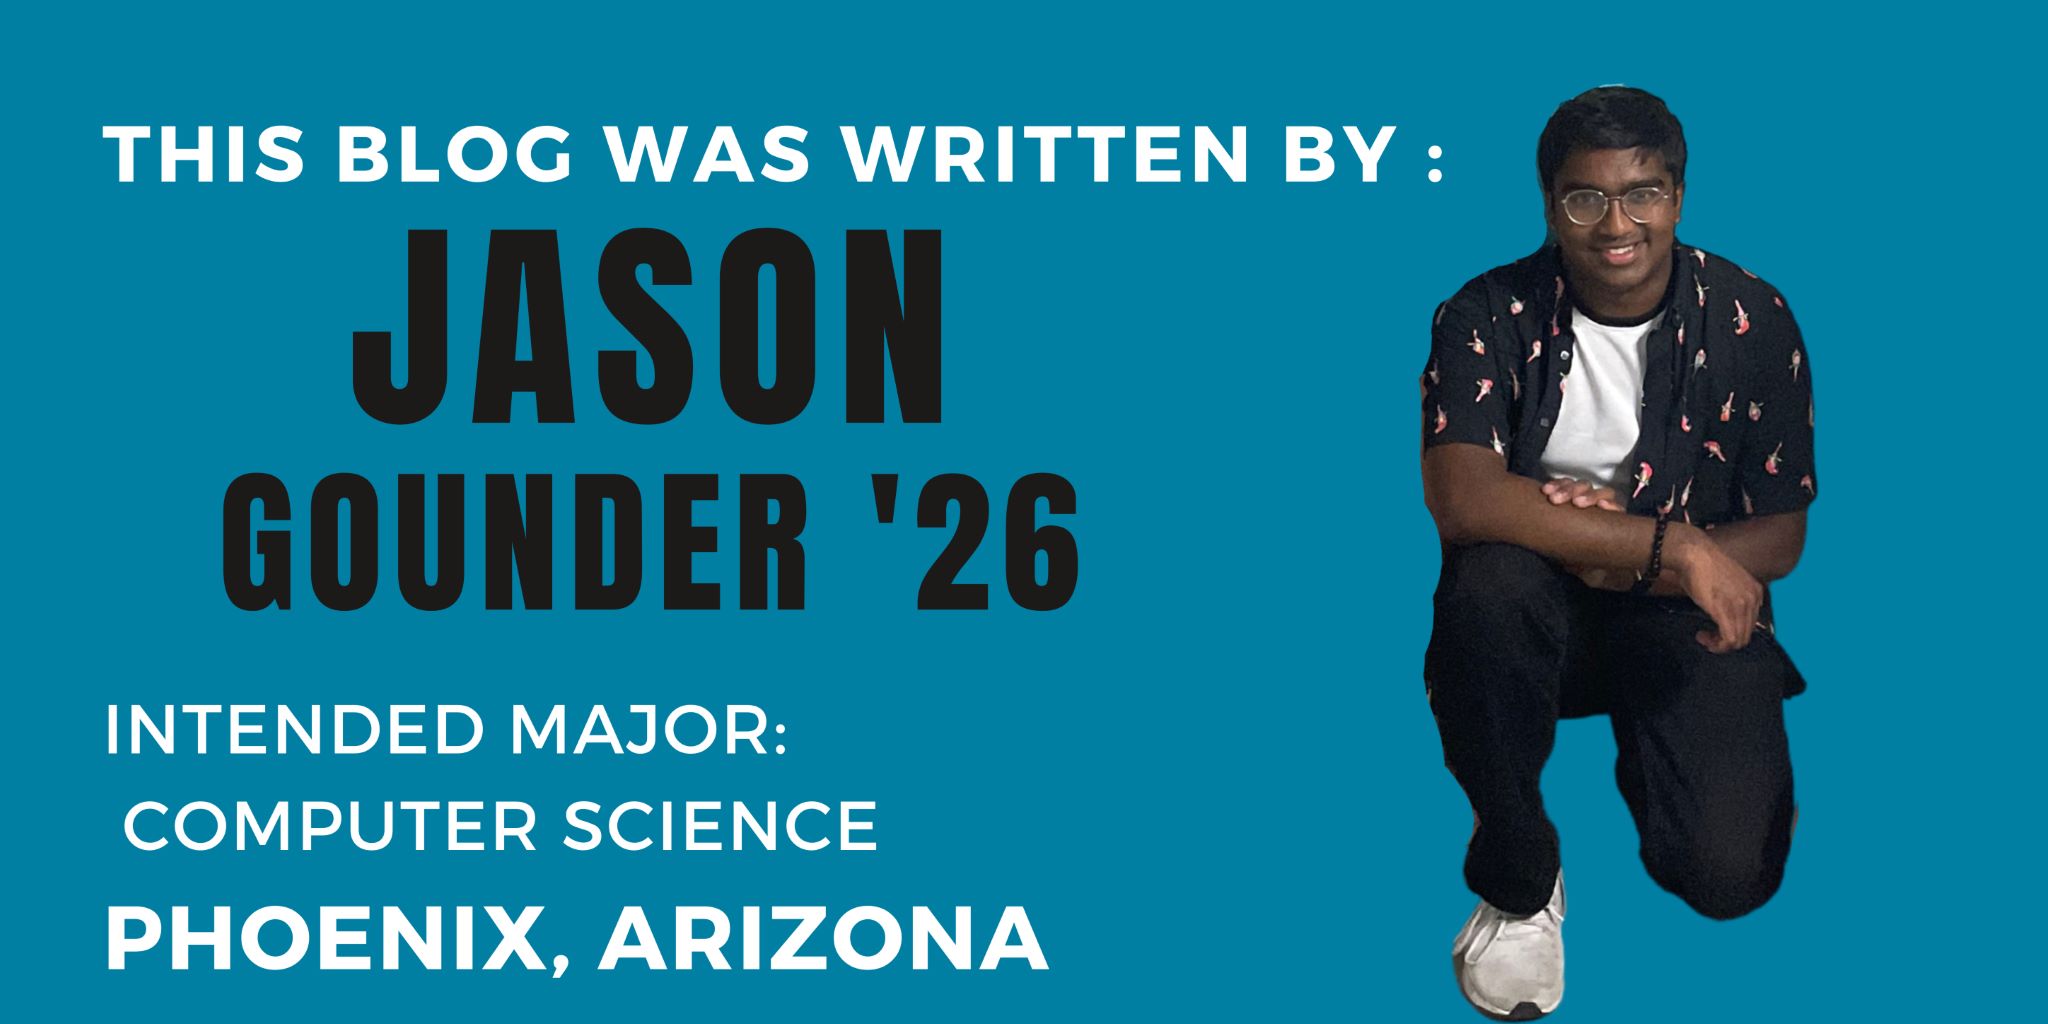 This blog was written by: Jason Gounder 26. Intended major: Computer science. Phoenix, Arizona.